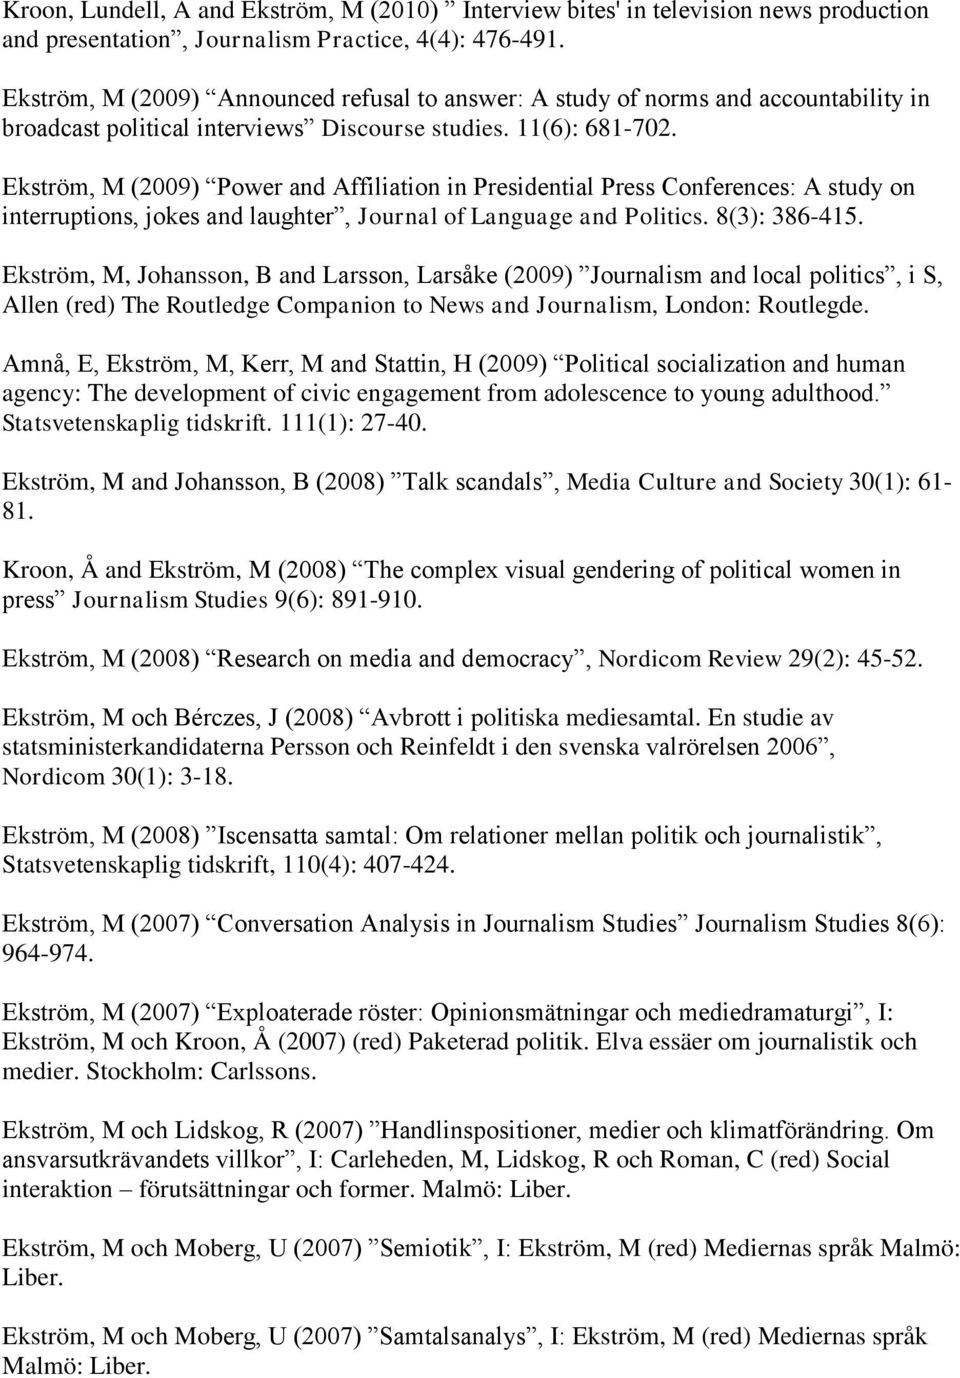 Ekström, M (2009) Power and Affiliation in Presidential Press Conferences: A study on interruptions, jokes and laughter, Journal of Language and Politics. 8(3): 386-415.